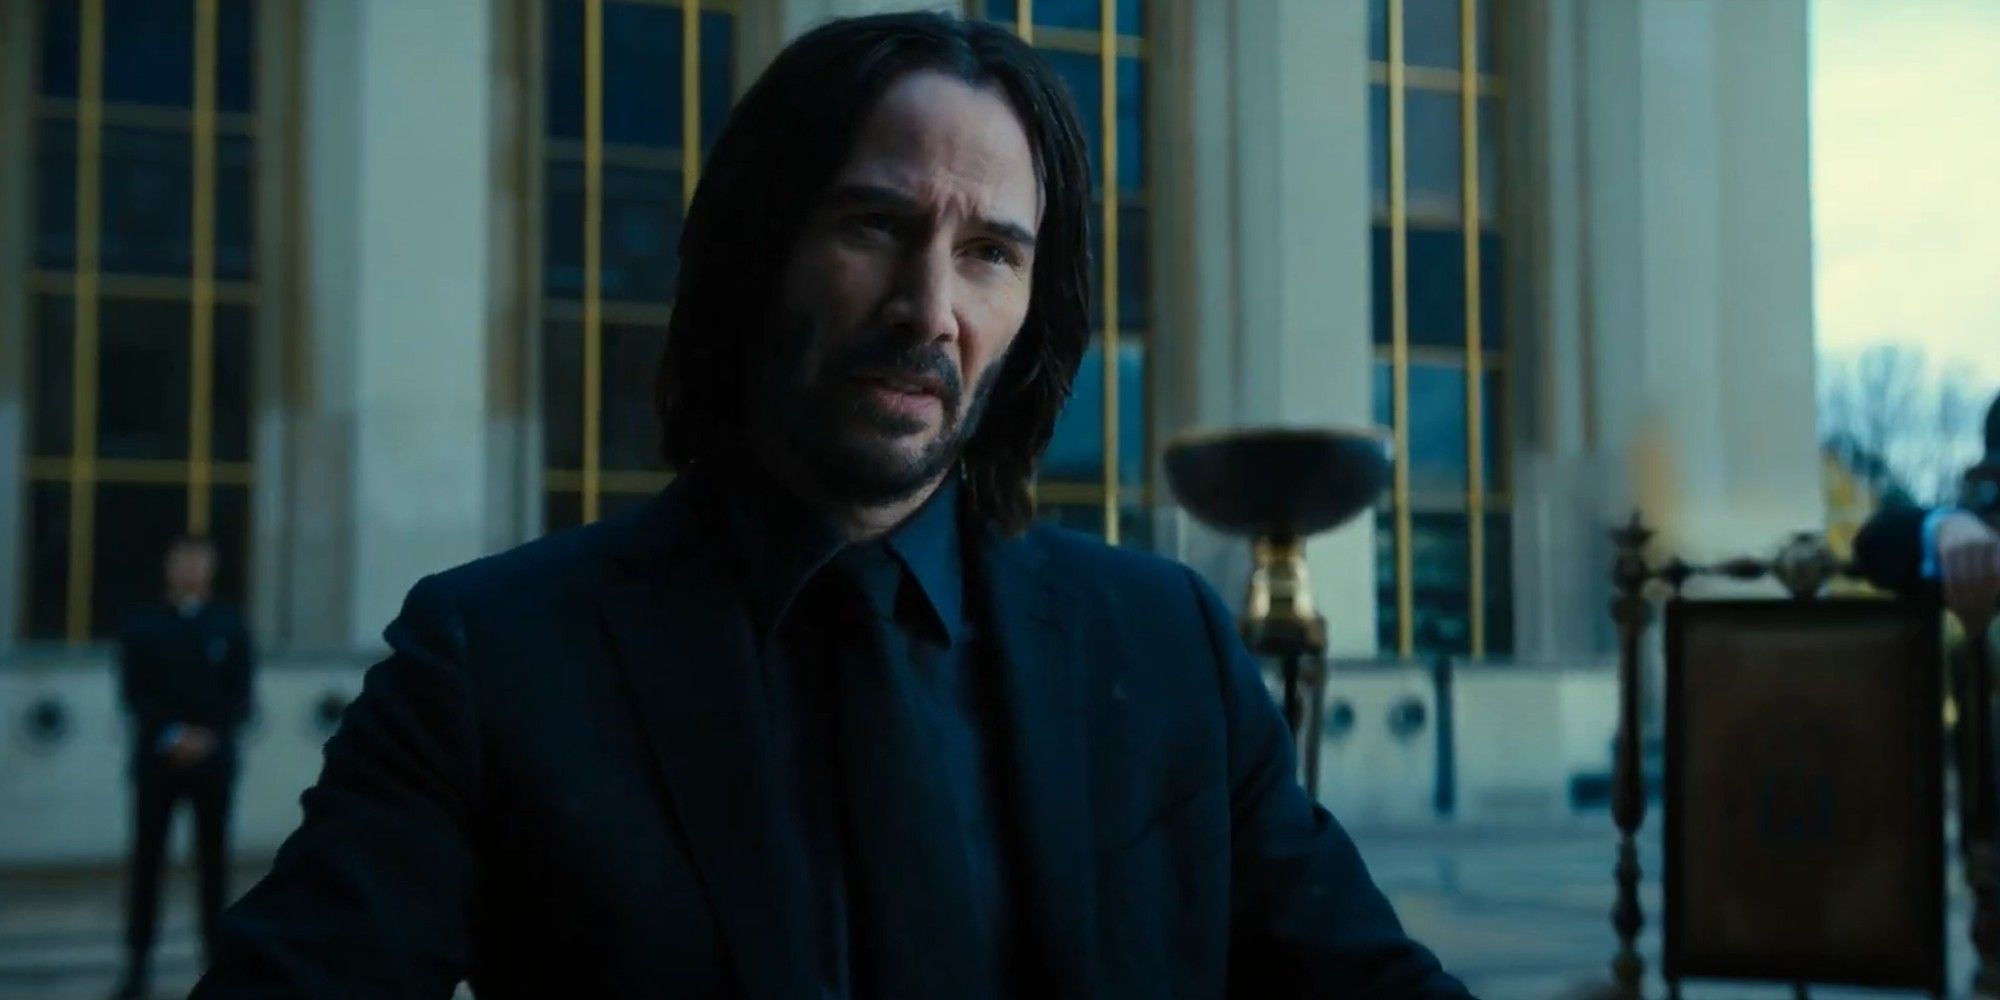 Three John Wick 4 Clips Show Keanu Reeves Play Cards Of Life & Death